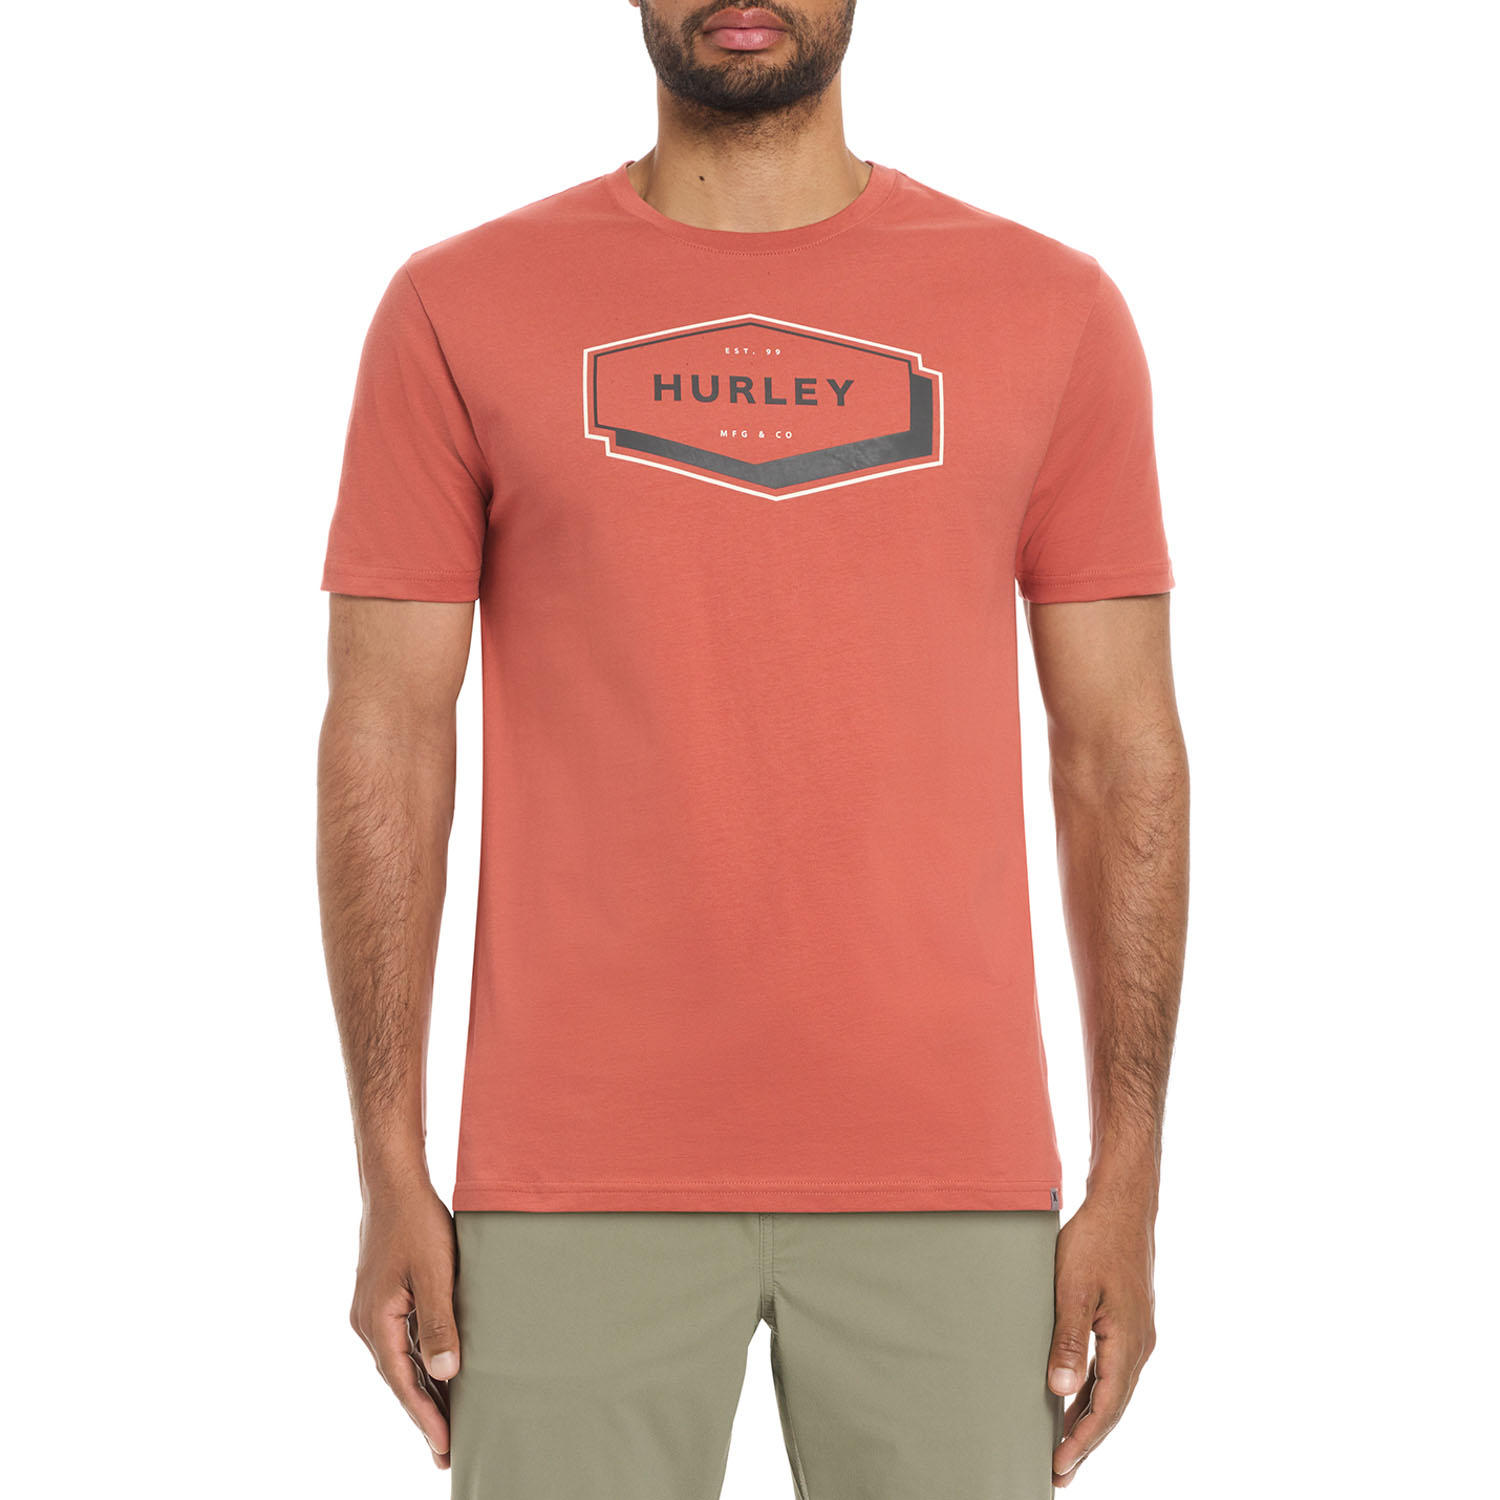 Hurley Men's All Day Graphic Tee Redwood XL